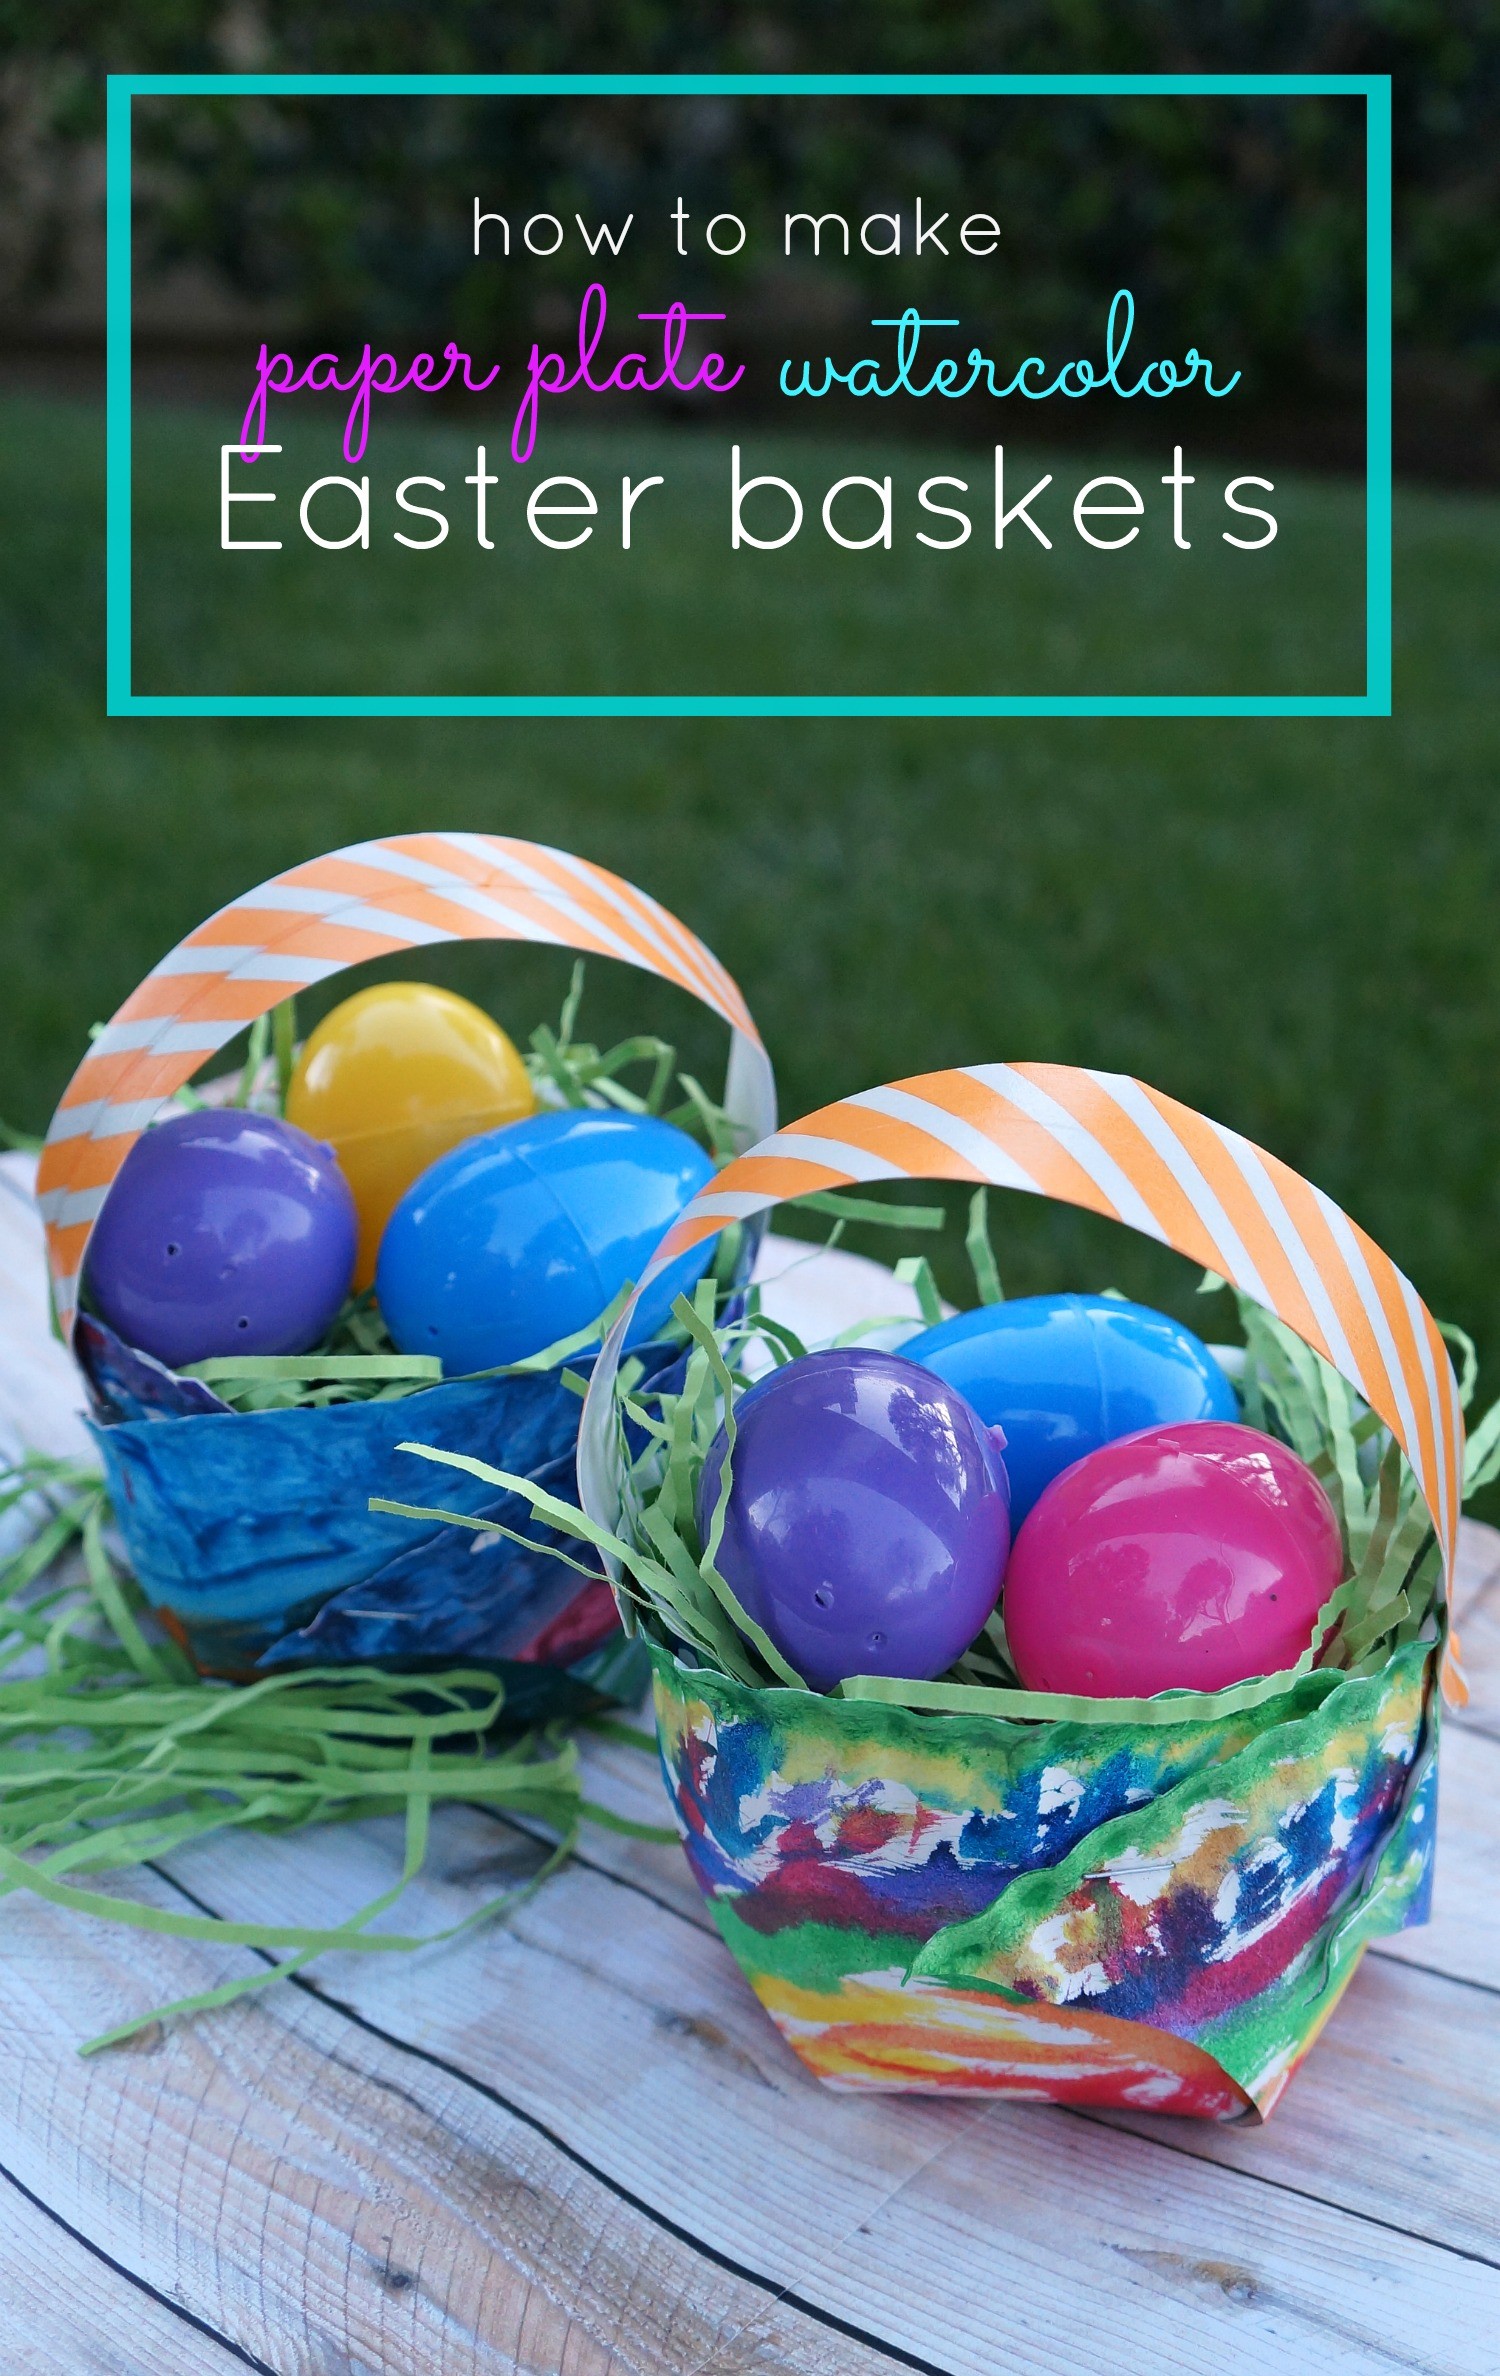 DIY Paper Plate Easter Baskets Craft - learn how to make an Easter basket out of paper